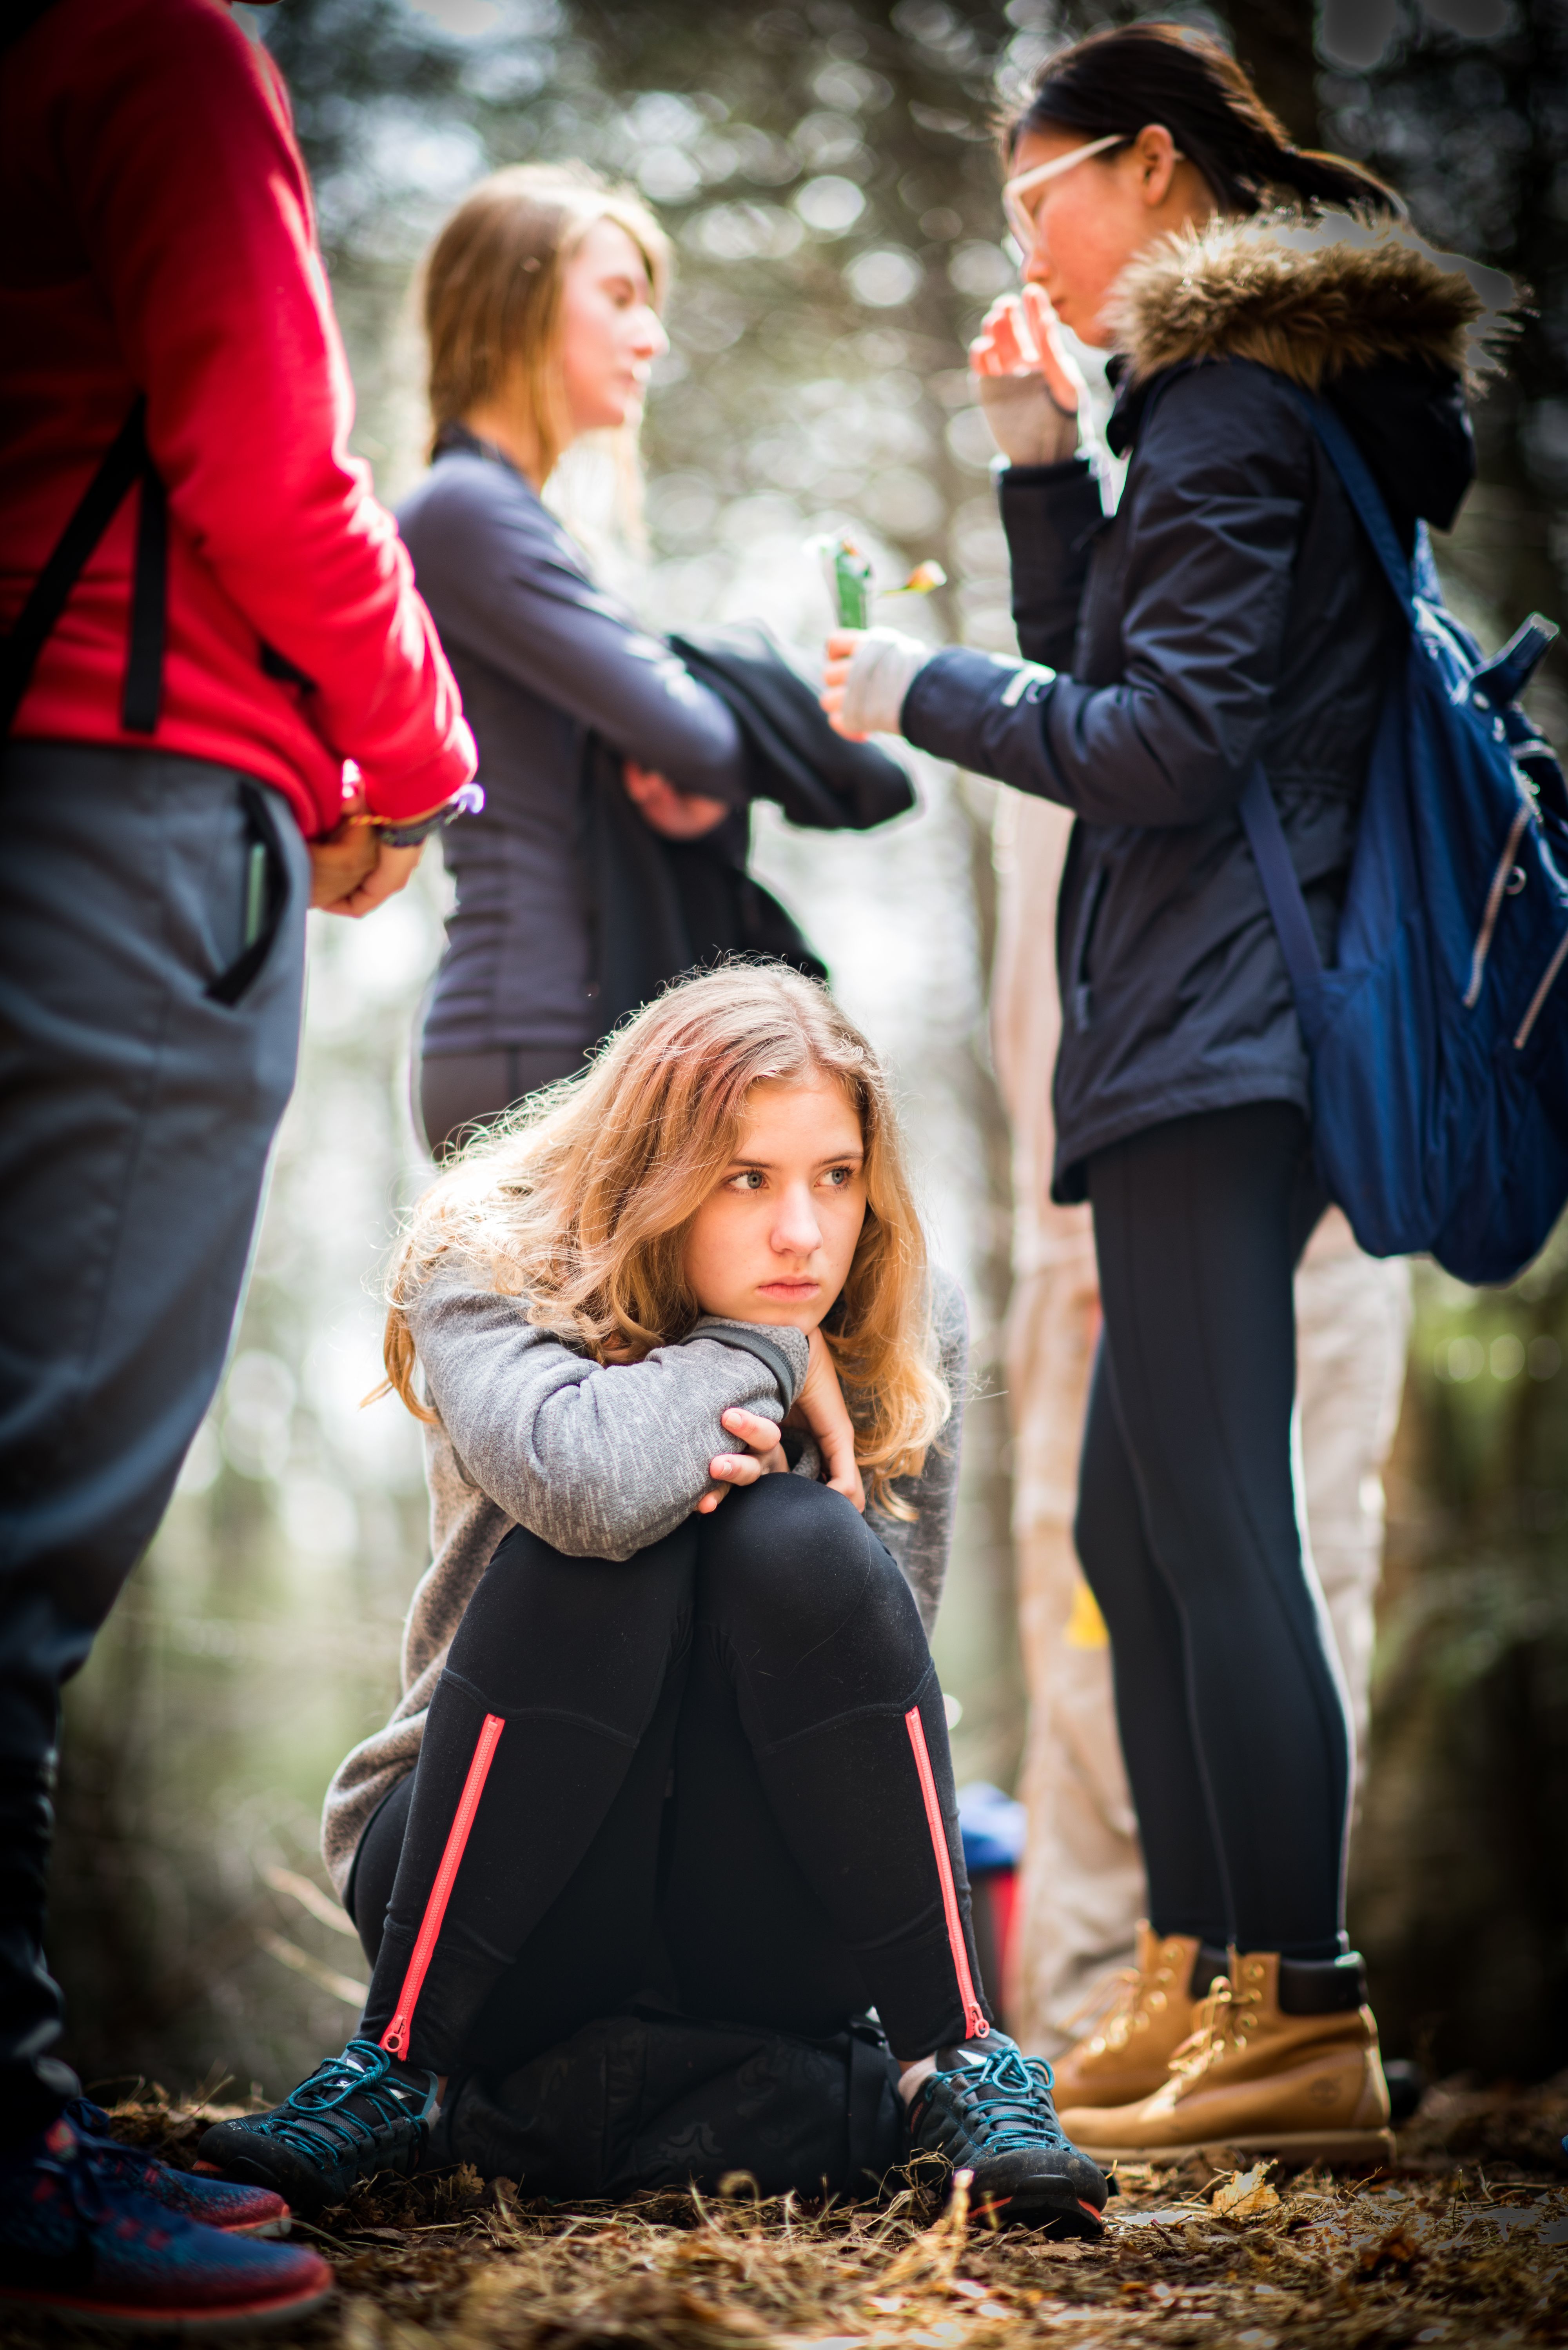 High school girl sits for a quiet moment on a hike with her classmates